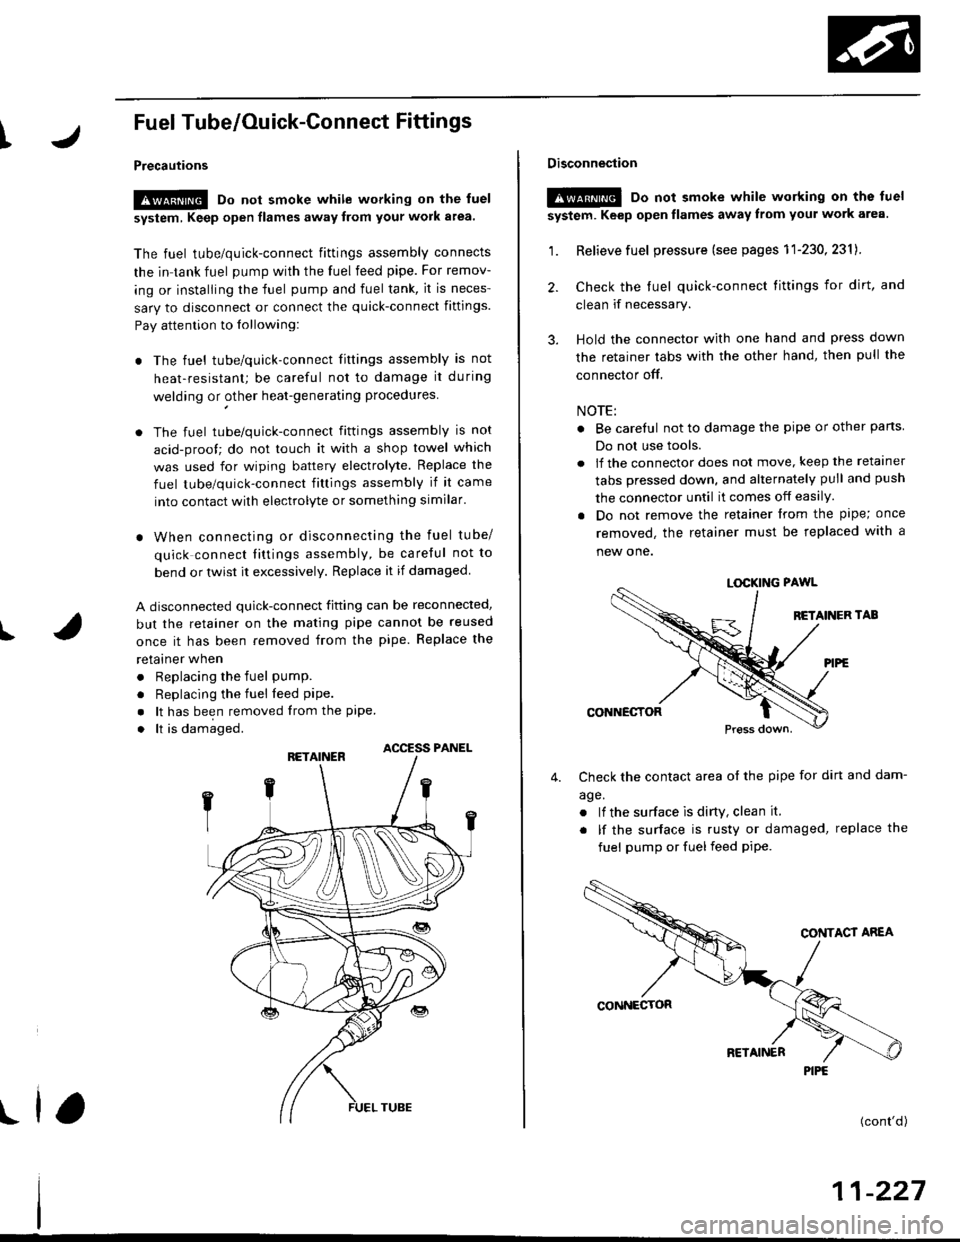 HONDA CIVIC 2000 6.G Owners Guide I
Fuel Tube/Ouick-Gonnect Fittings
Precautions
!@ Do not smoke while working on the fuel
system, Keep open flames away from your work a.ea
The fuel tube/quick-connect fittings assembly connects
the i